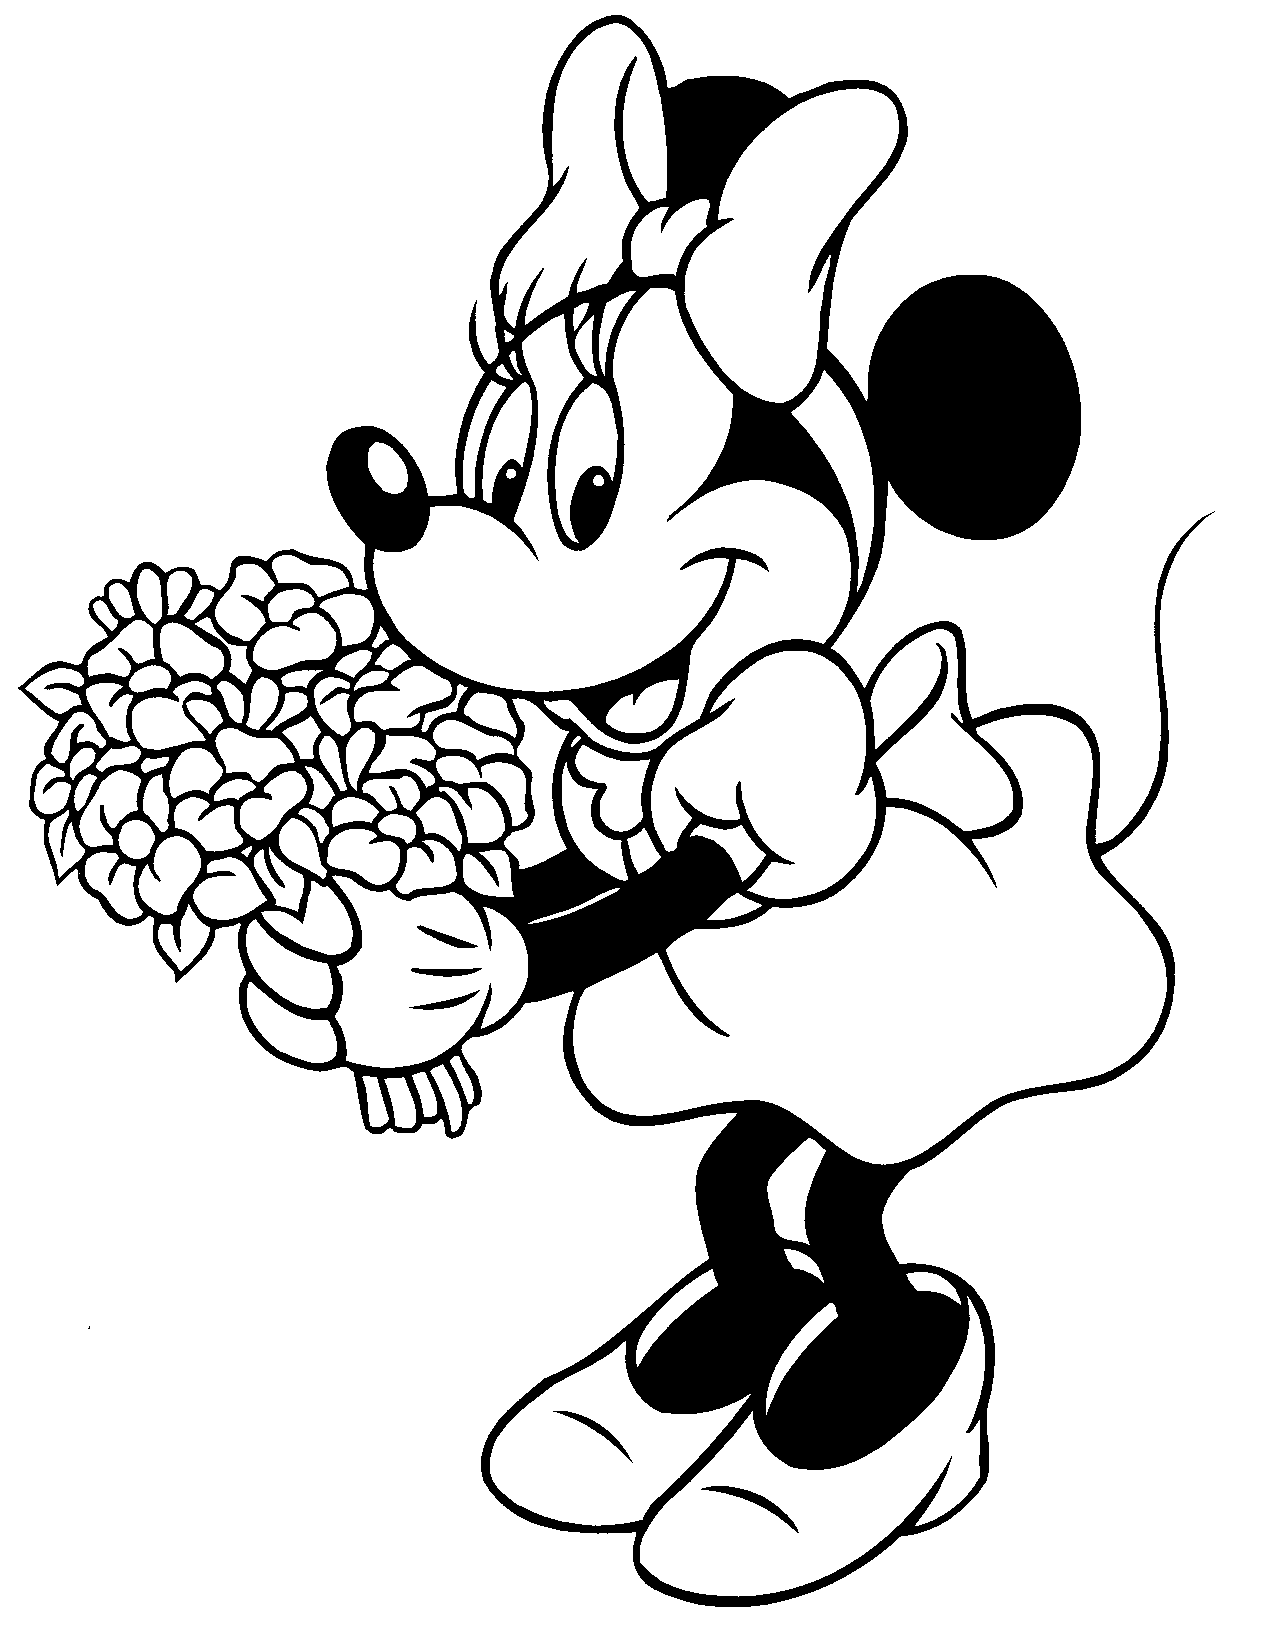 Black And White Mickey Mouse Cartoons - ClipArt Best